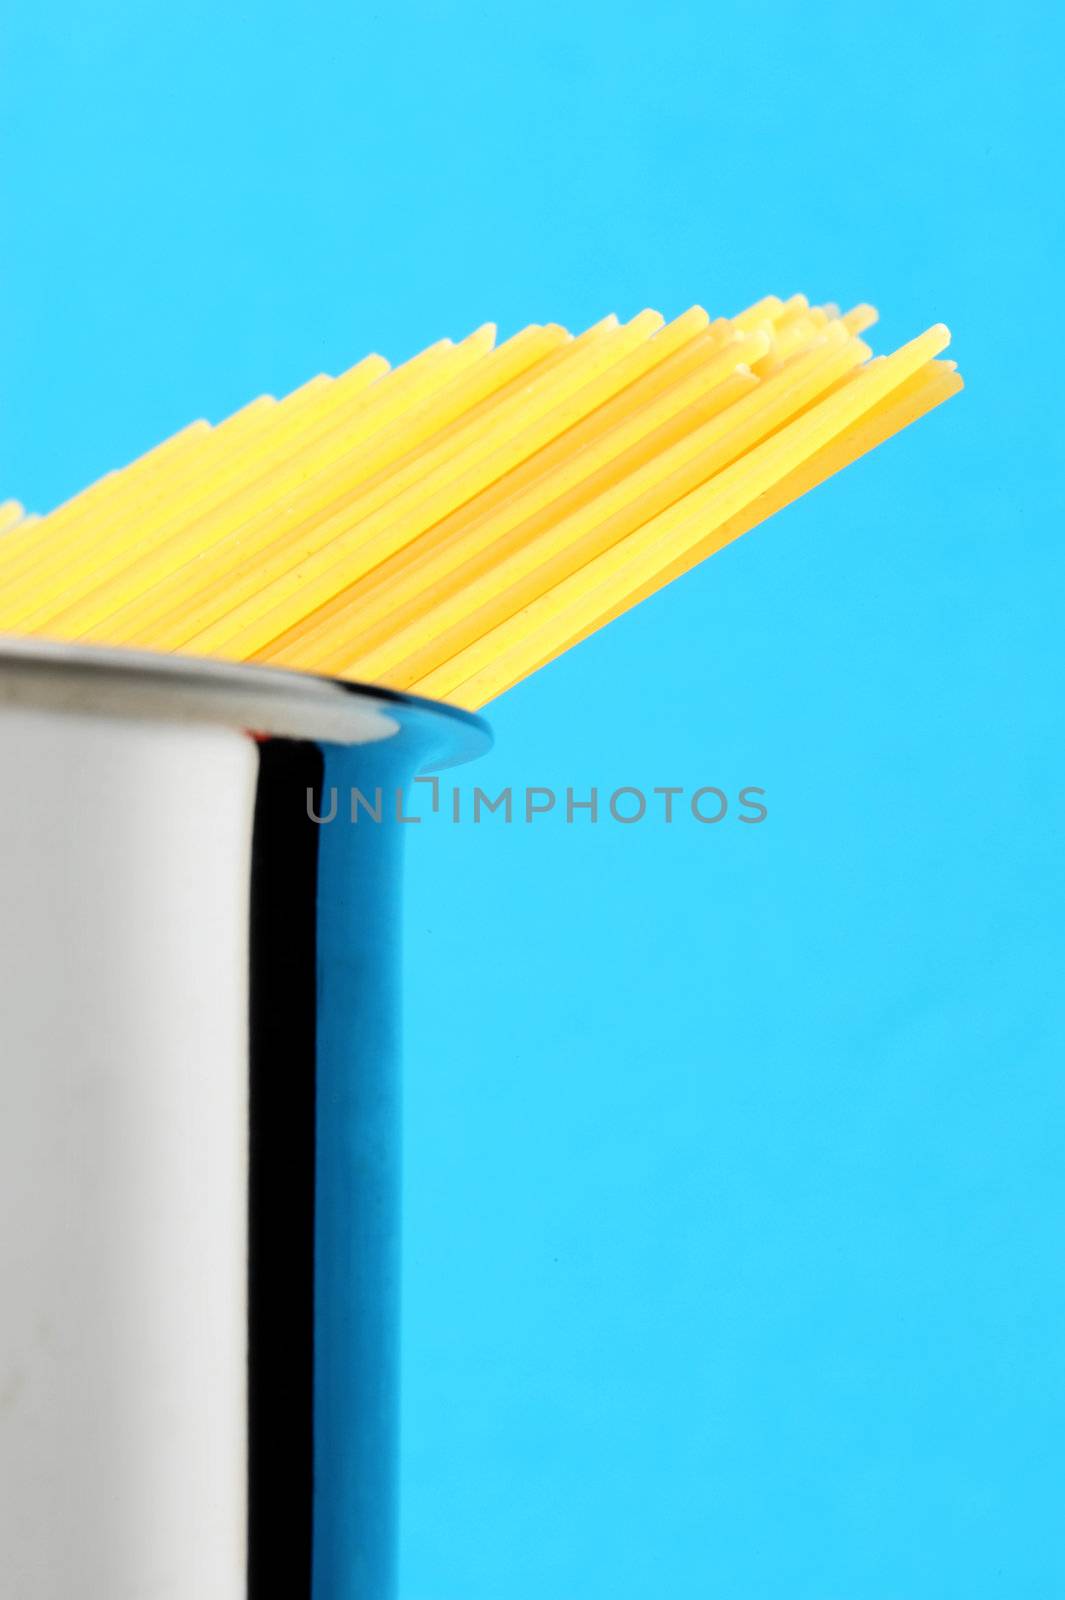 uncooked spaghetti noodles . Italian pasta by stokkete